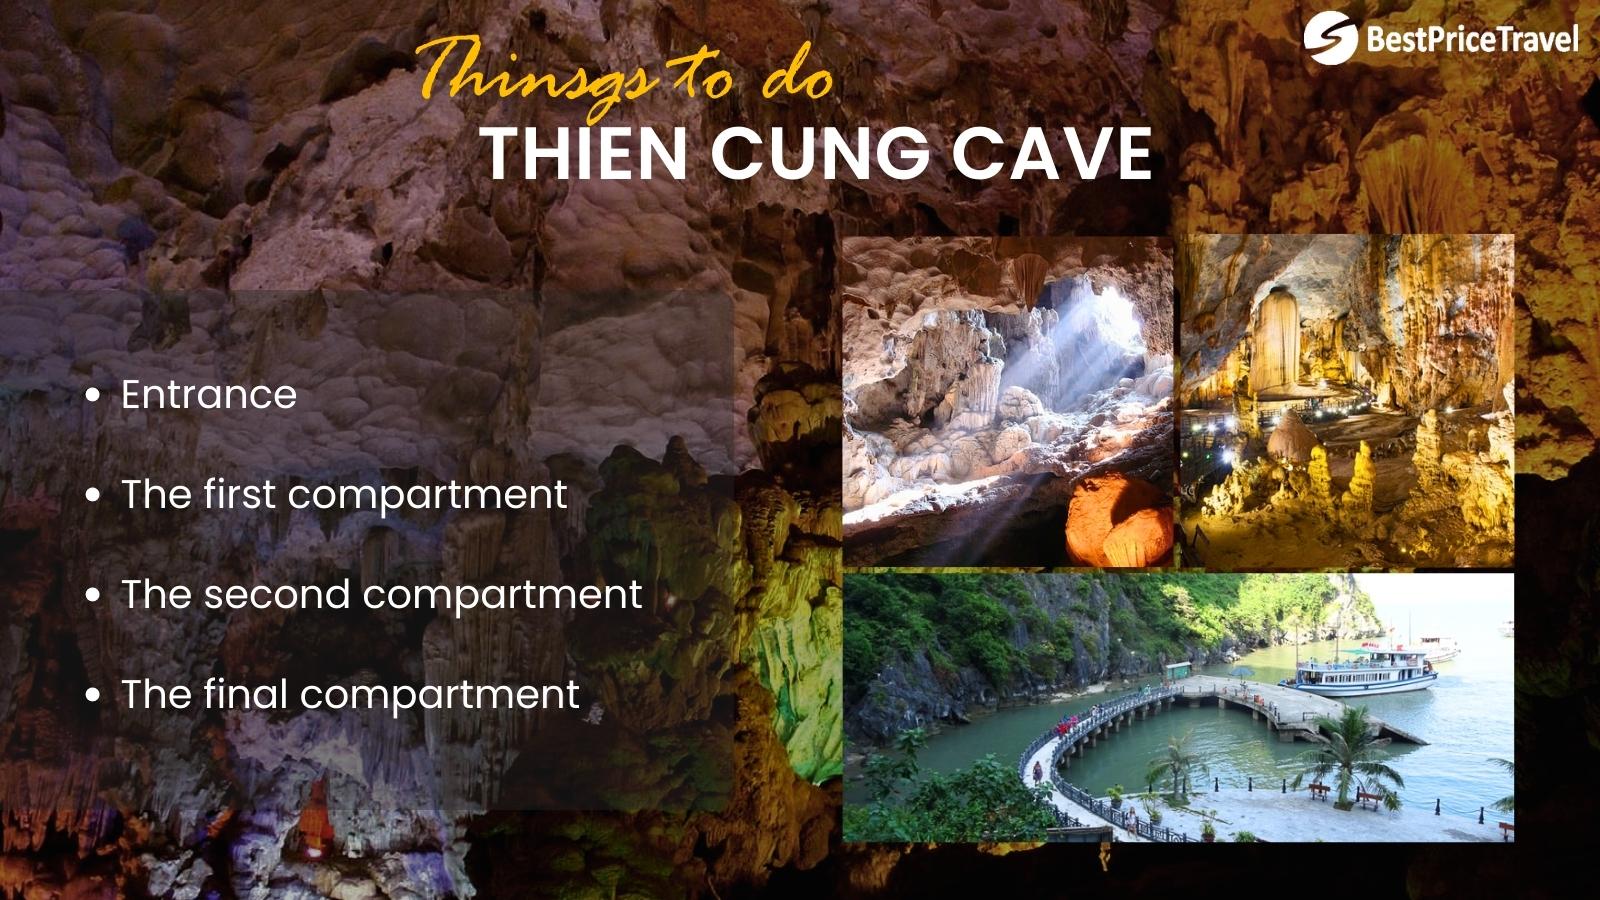 Things to do at Thien Cung Cave